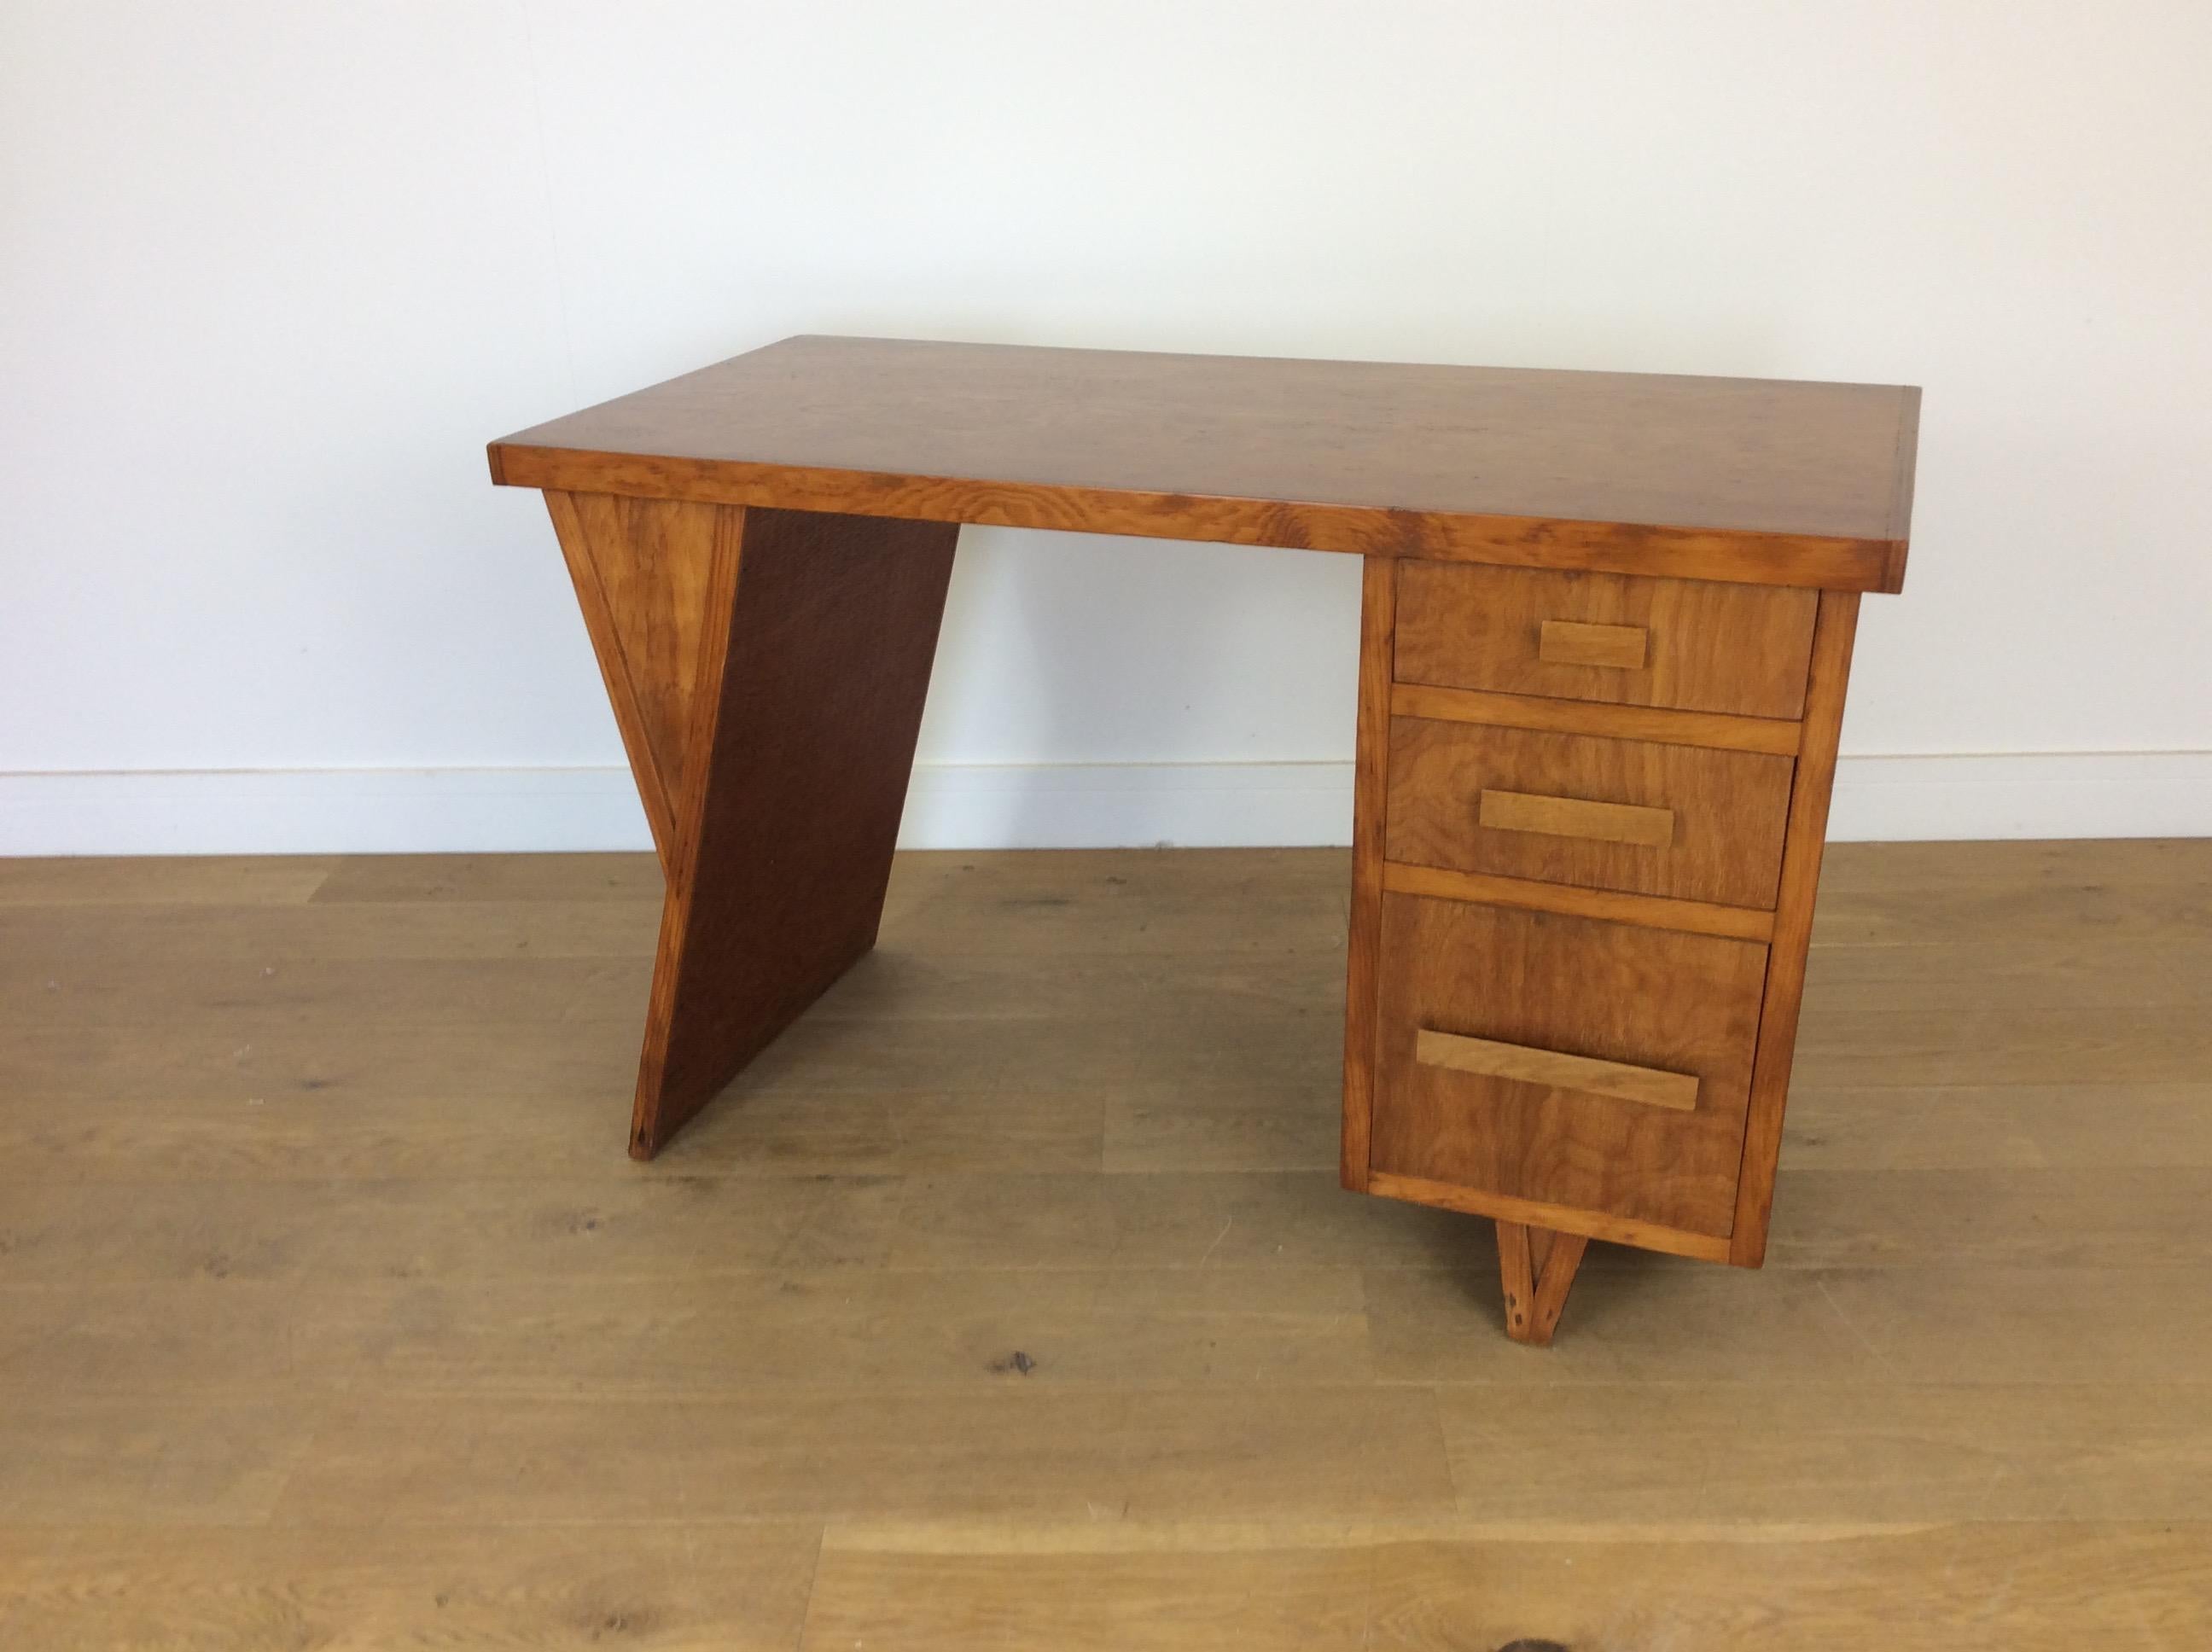 Unusual and rare midcentury textured ply desk.
At the moment this is unattributed, but a very interesting desk with loads of style.
Bank of three drawers to the right raised on a V support, the left with a panelled y support with this intriguing